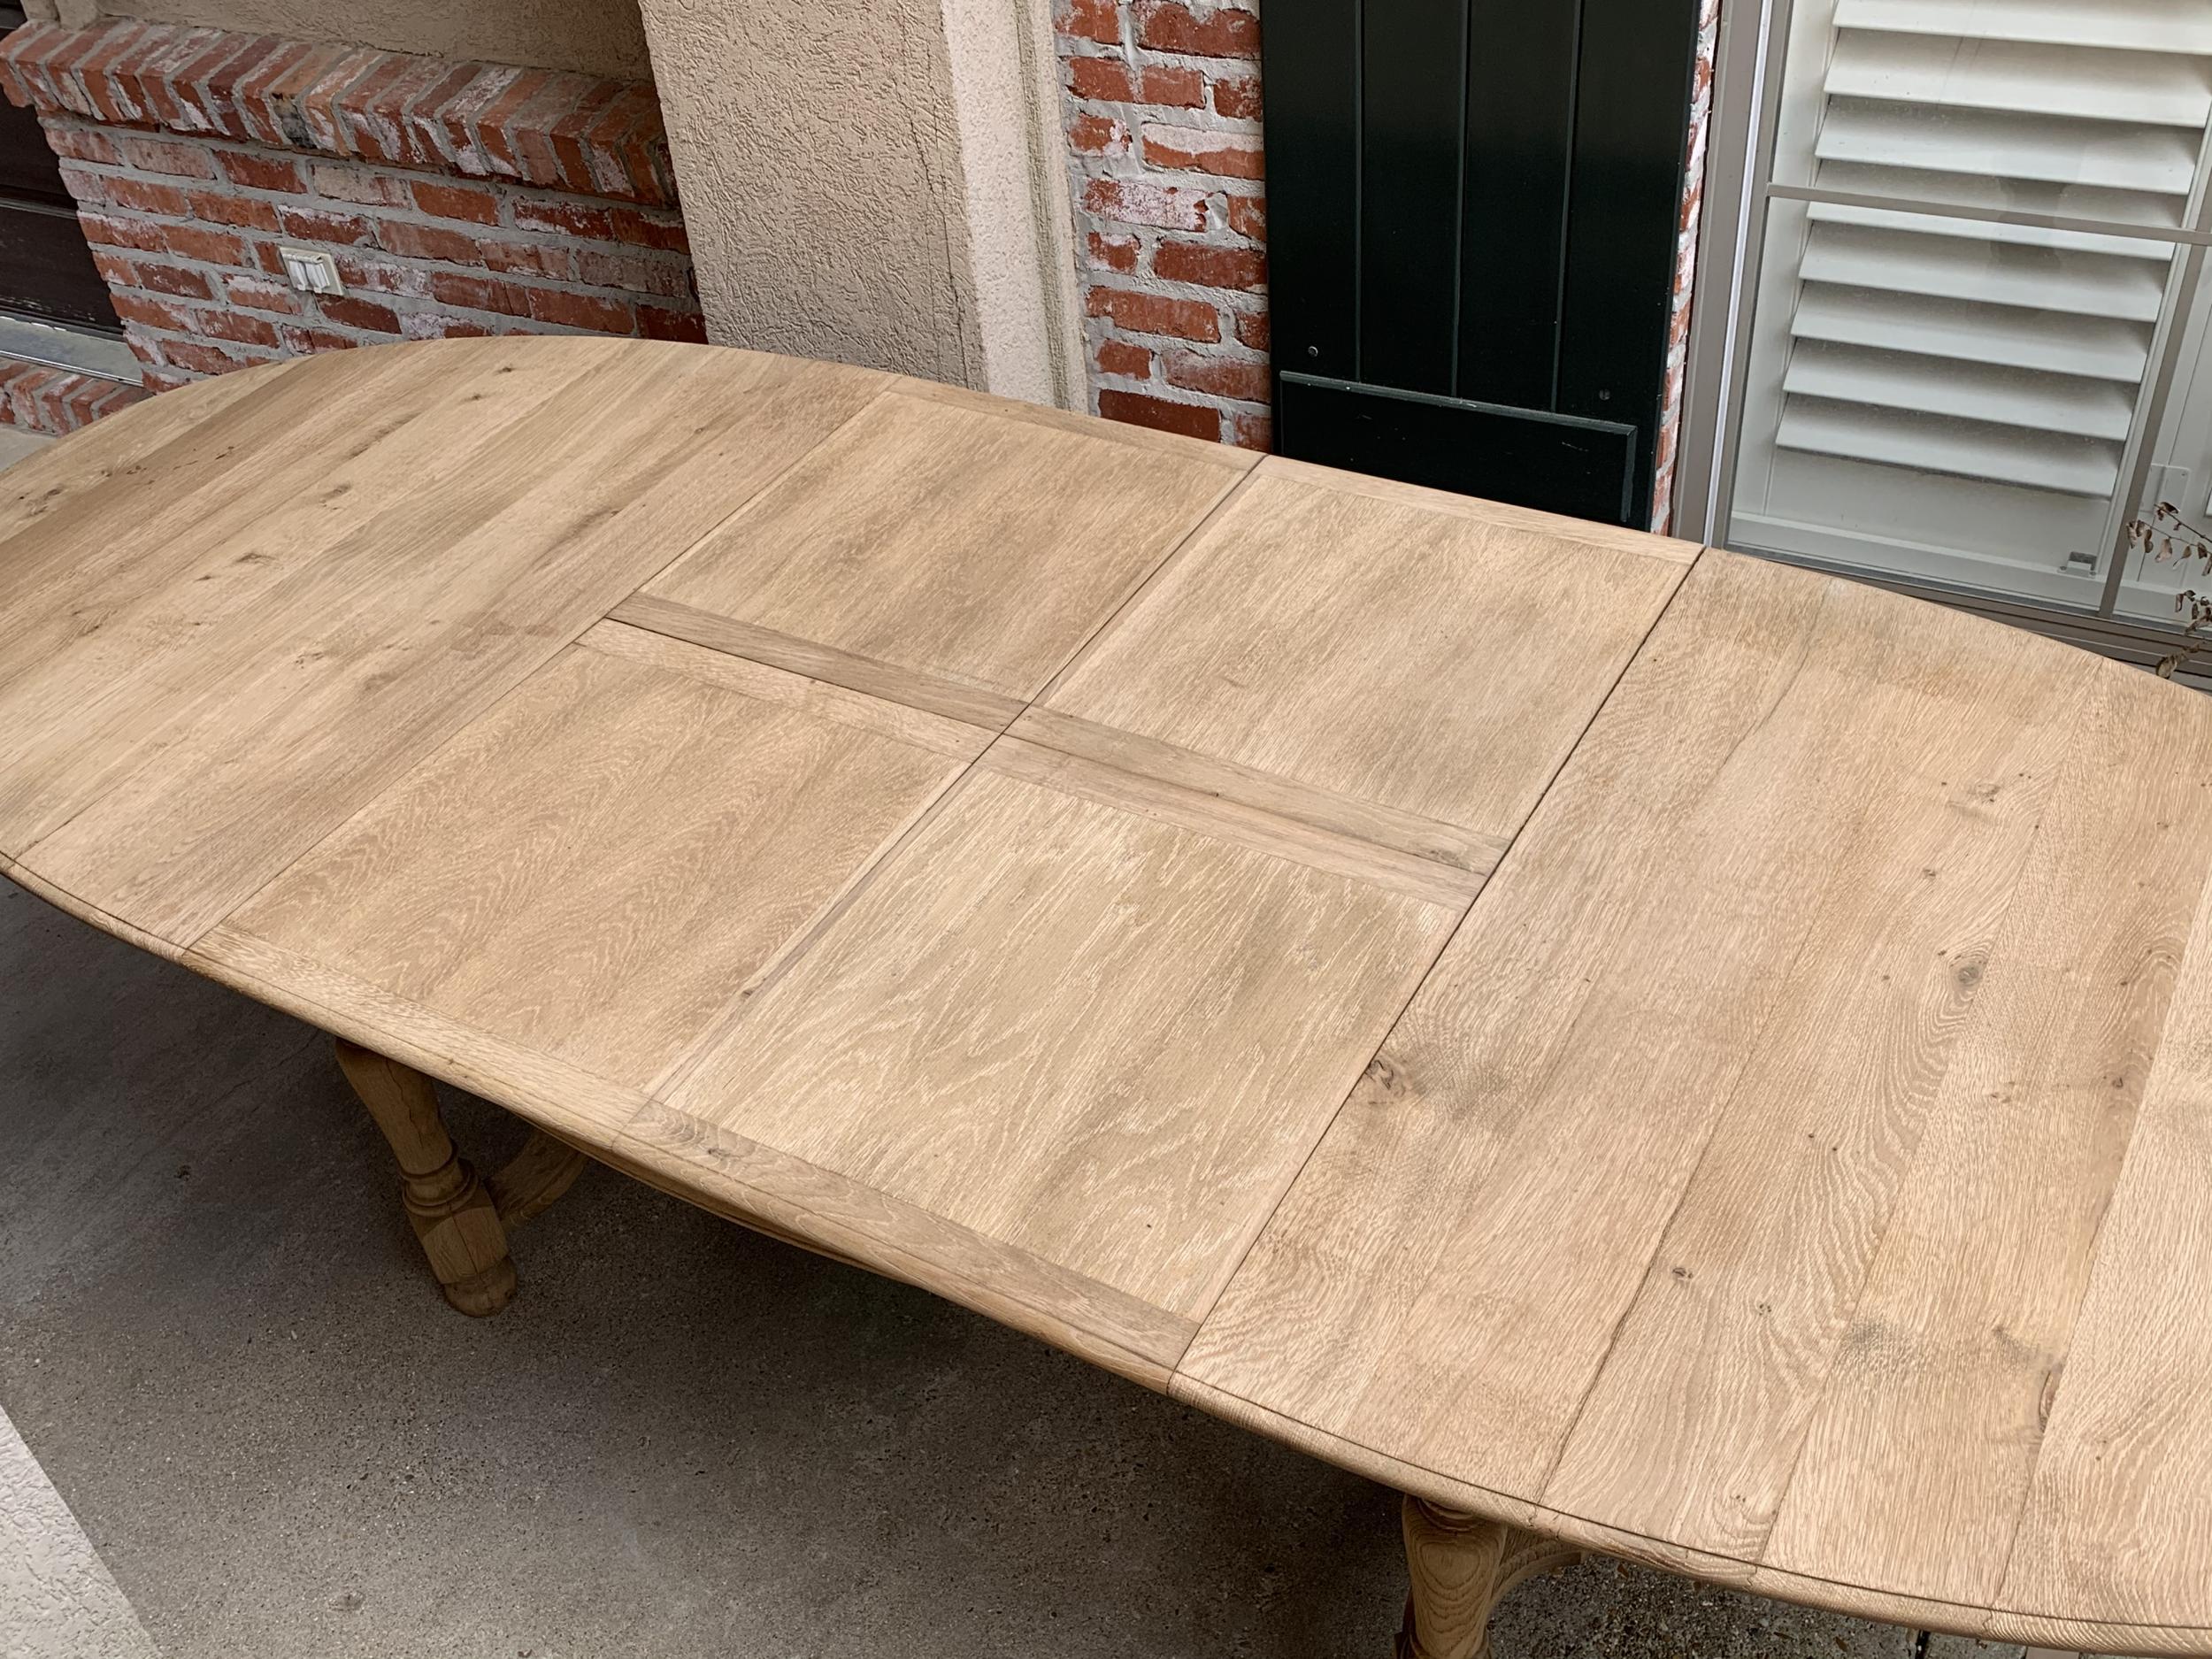 Bleached Antique French Stripped Oak Oval Dining Table Farmhouse Draw Leaf Rustic